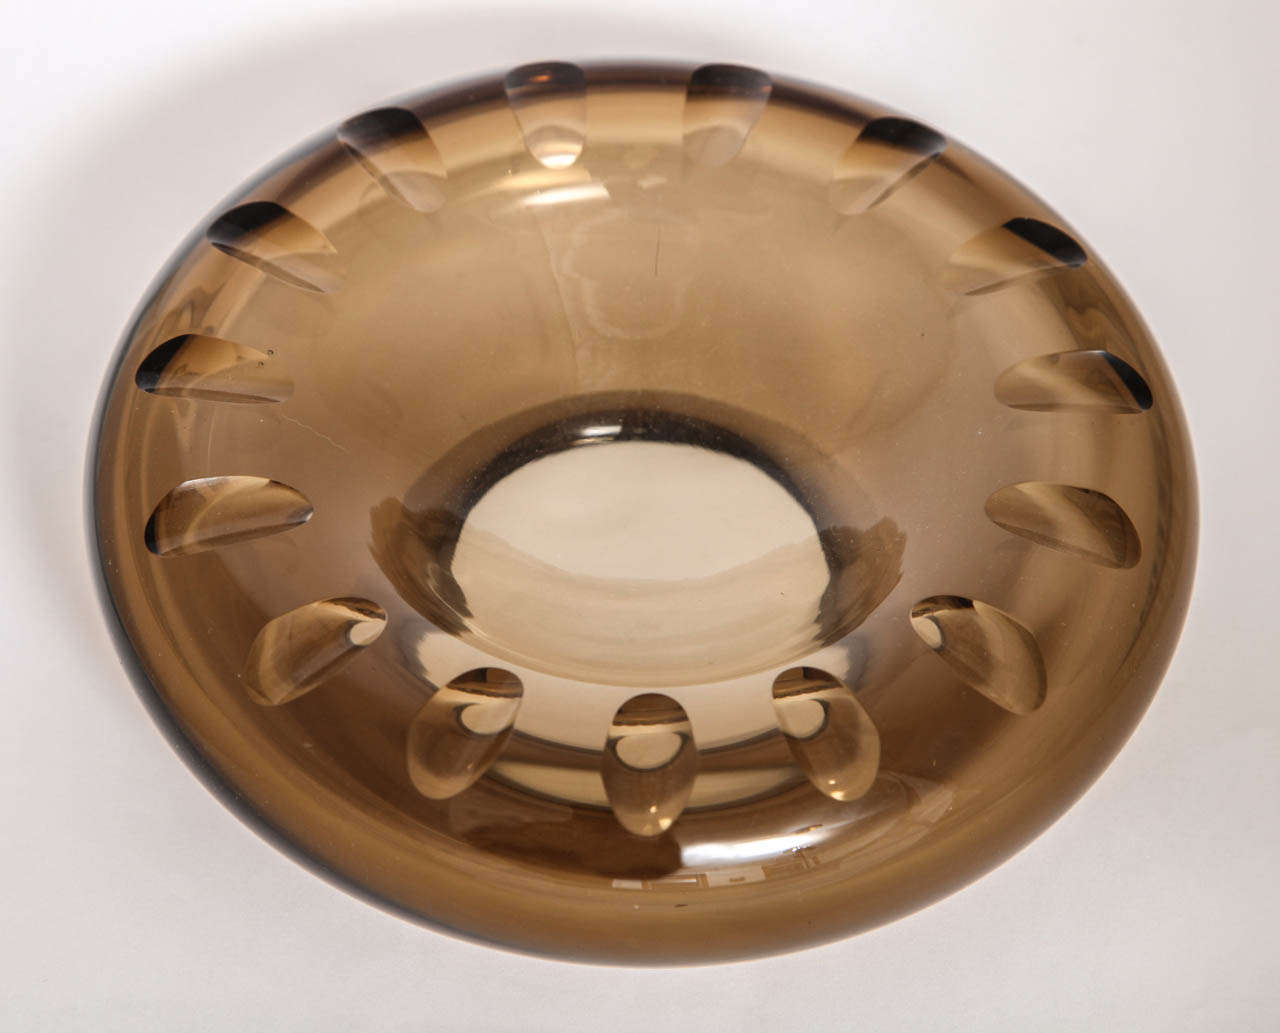 Beautiful form in transparent, smoky-brown glass. By Marc Newson c. 1995.